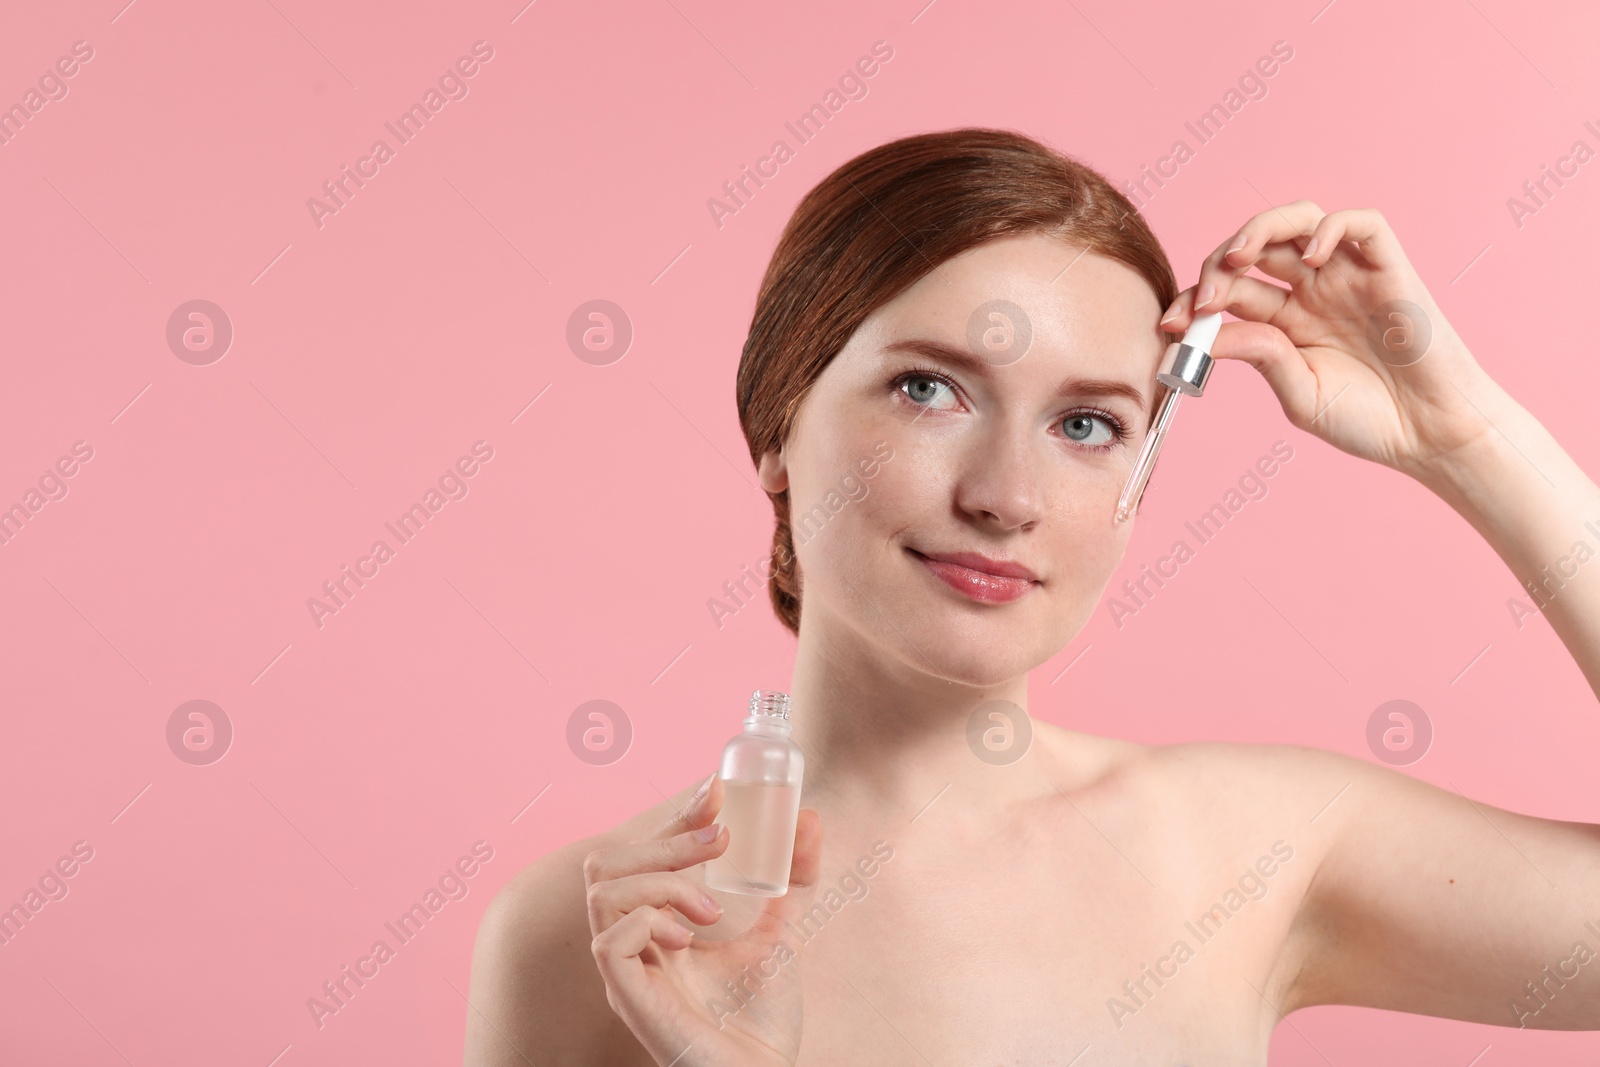 Photo of Beautiful woman with freckles applying cosmetic serum onto her face on pink background. Space for text